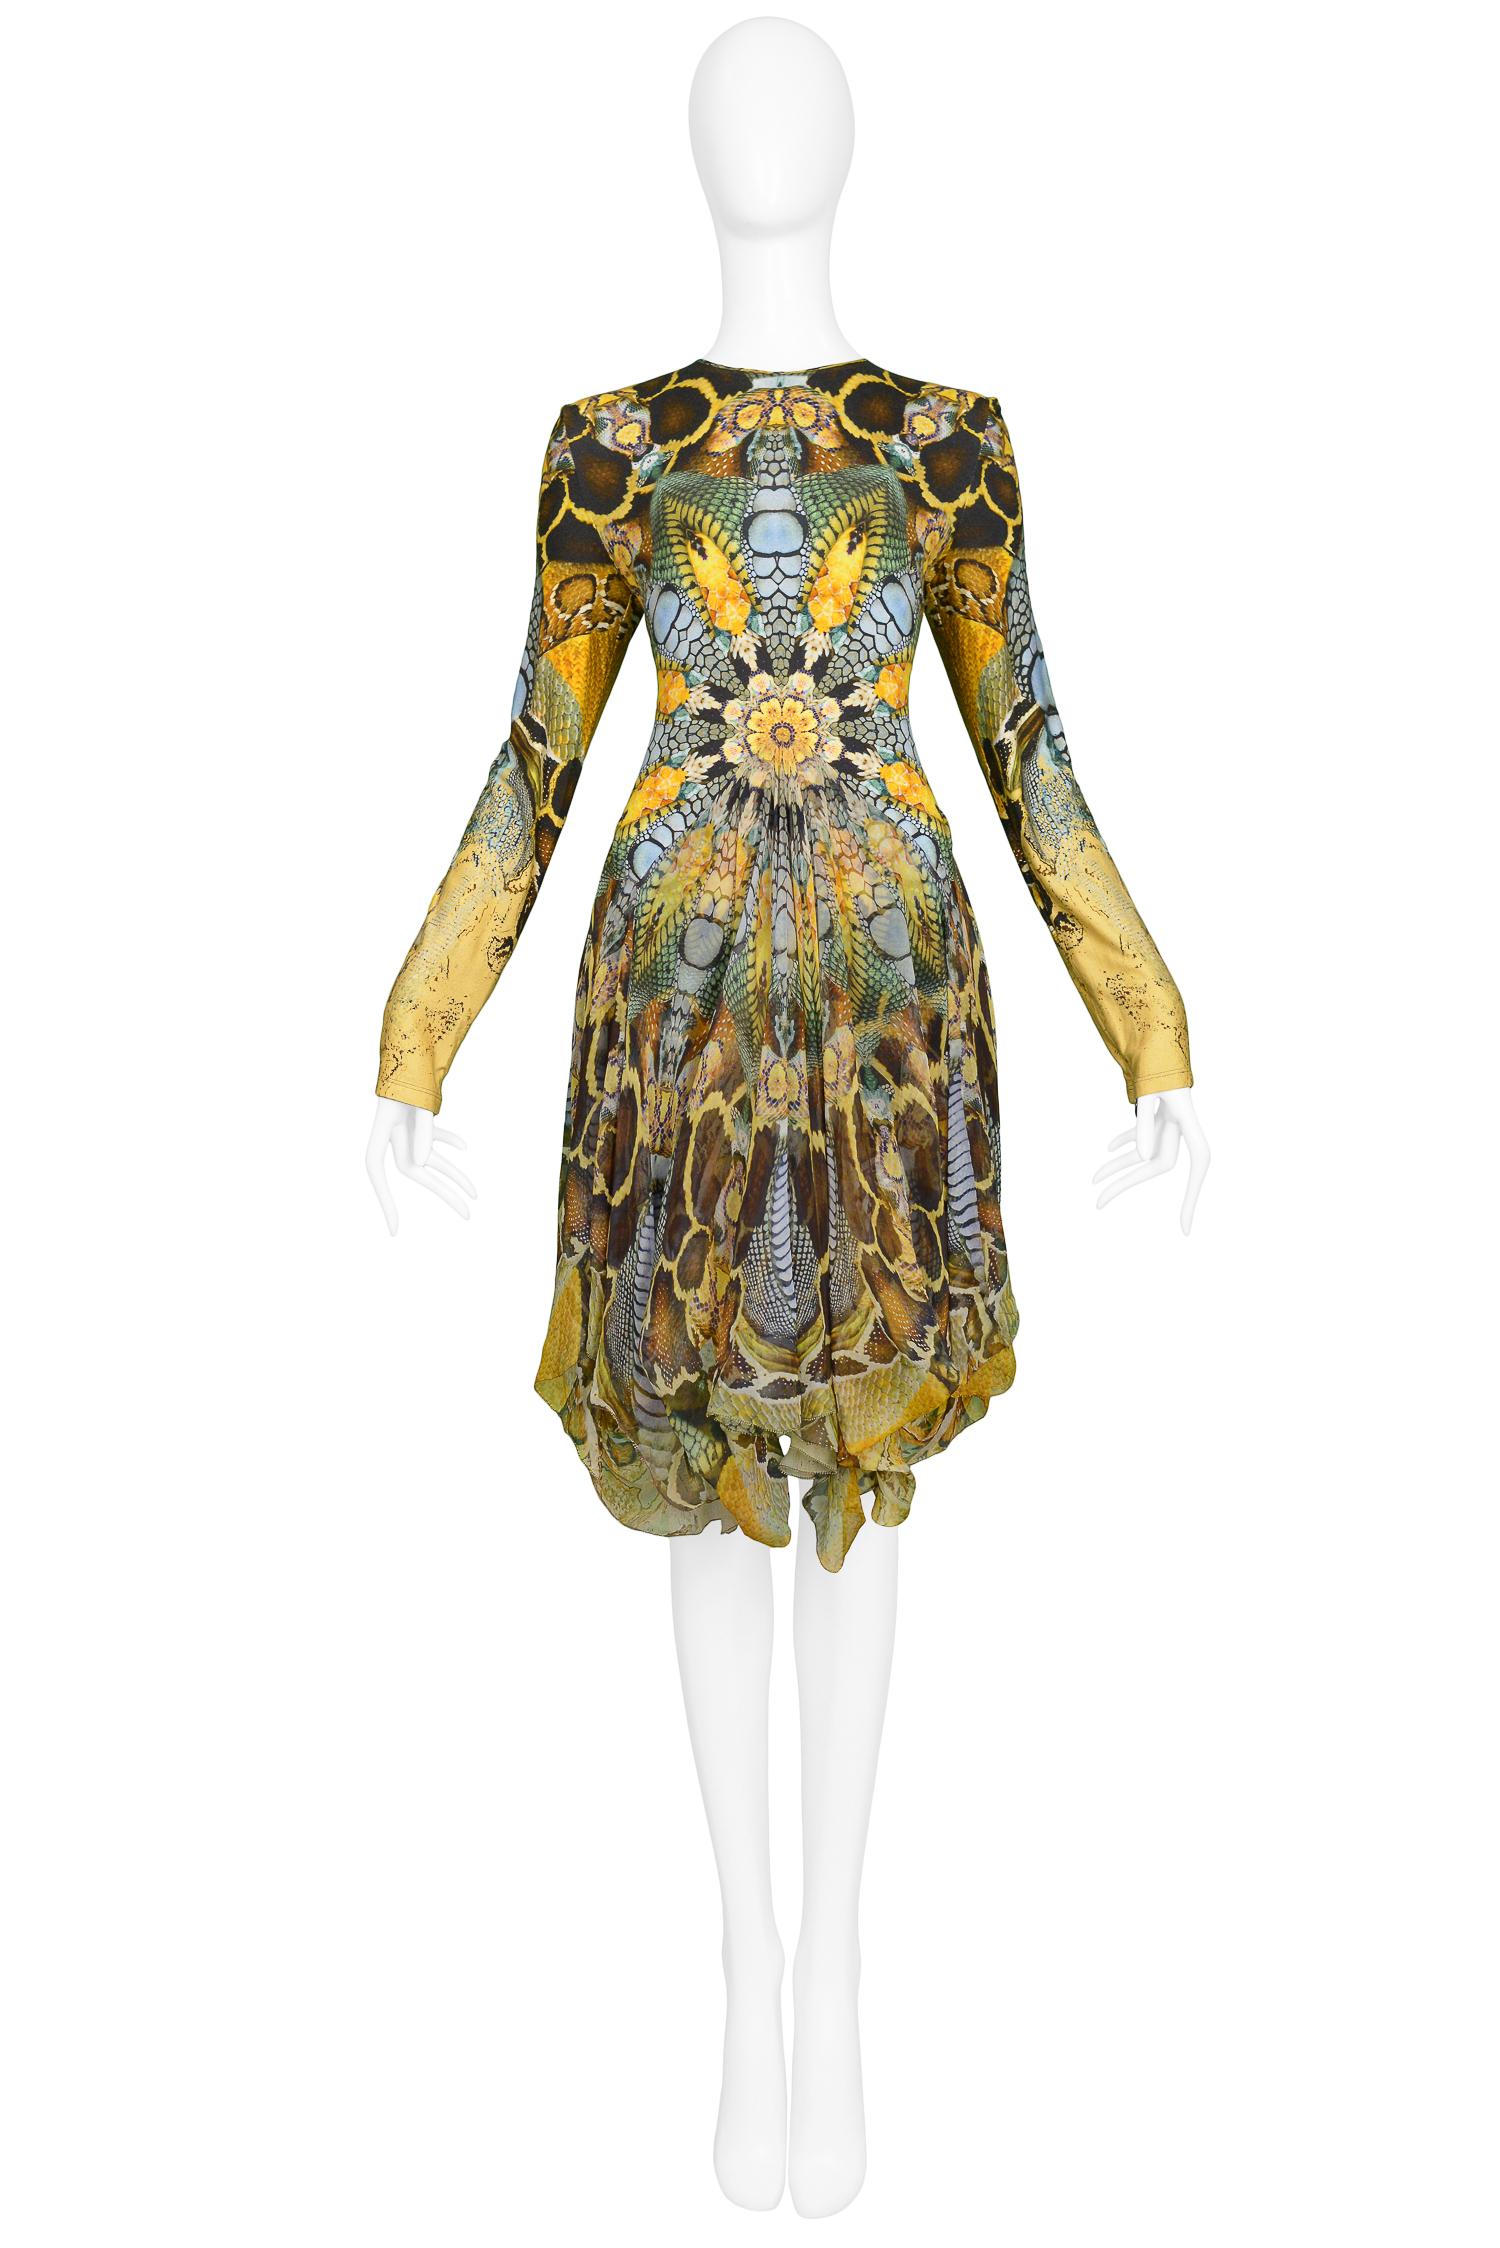 Vintage Alexander McQueen Plato's Atlantis jersey dress featuring an allover multi-color reptile scale print, long fitted sleeves & asymmetrical hem with chiffon insets. An example from the memorable Spring/Summer 2010 Collection

Excellent